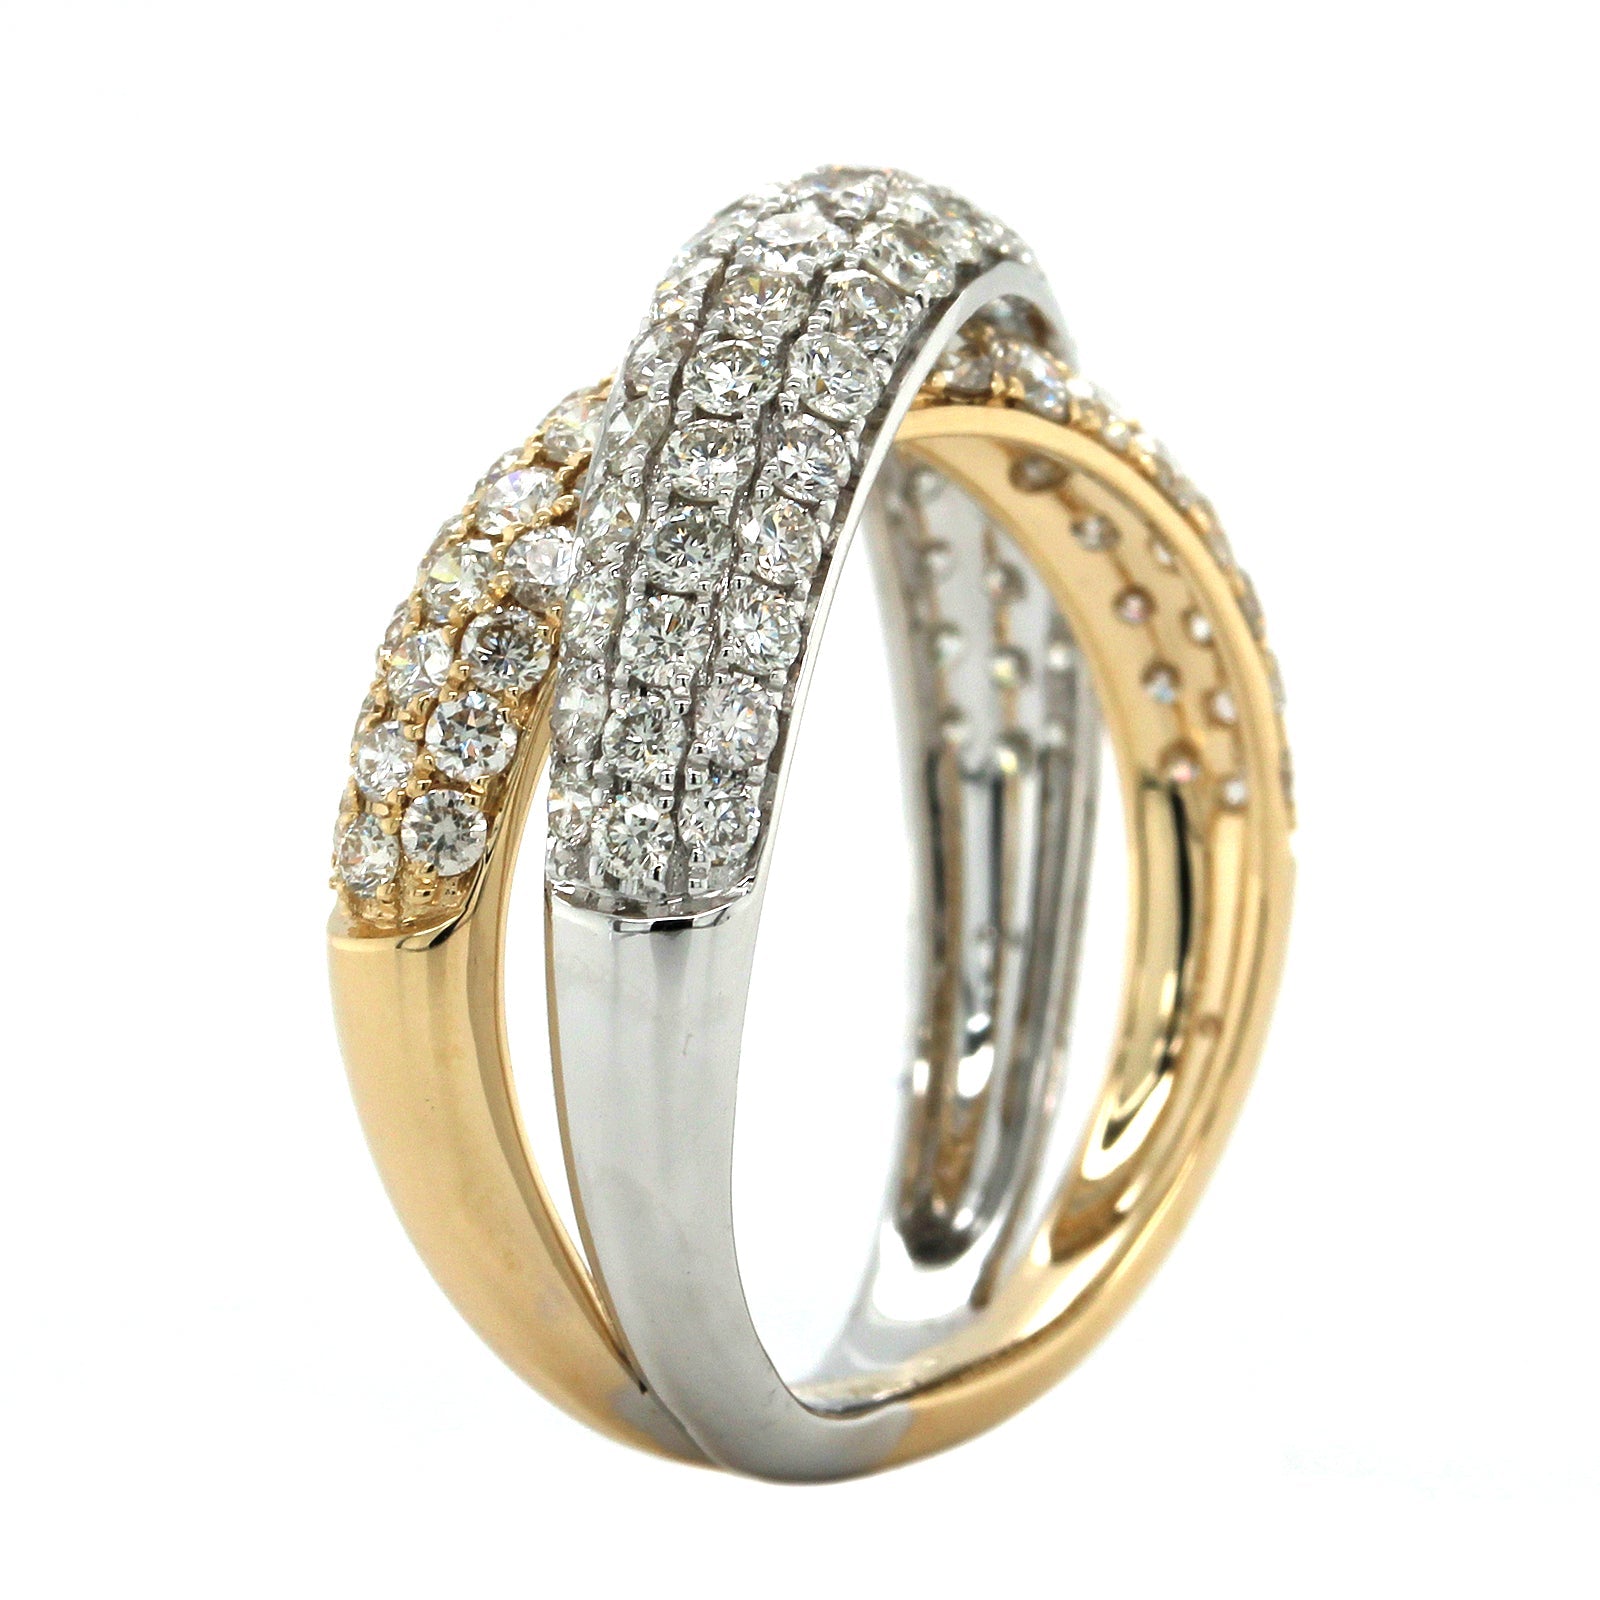 14K Two-Tone Gold Criss Cross Pave Diamond Ring, 14k yellow and white gold, Long's Jewelers